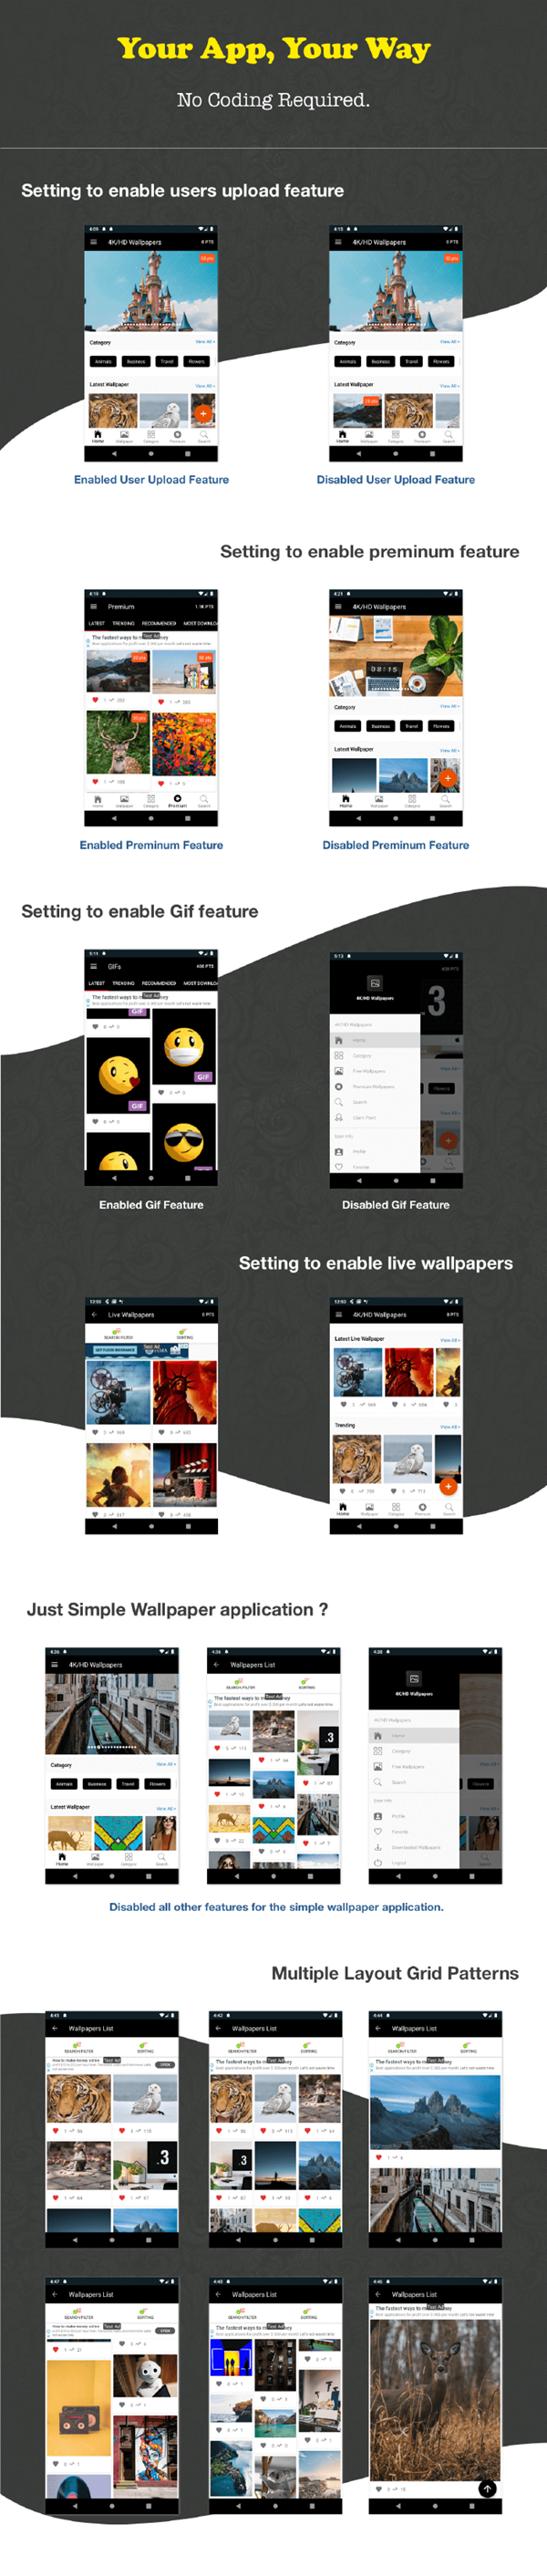 4K/HD Wallpaper Android App ( Auto Shuffle + Gif + Live + Admob + Firebase Noti + PHP Backend) 2.8 - 4